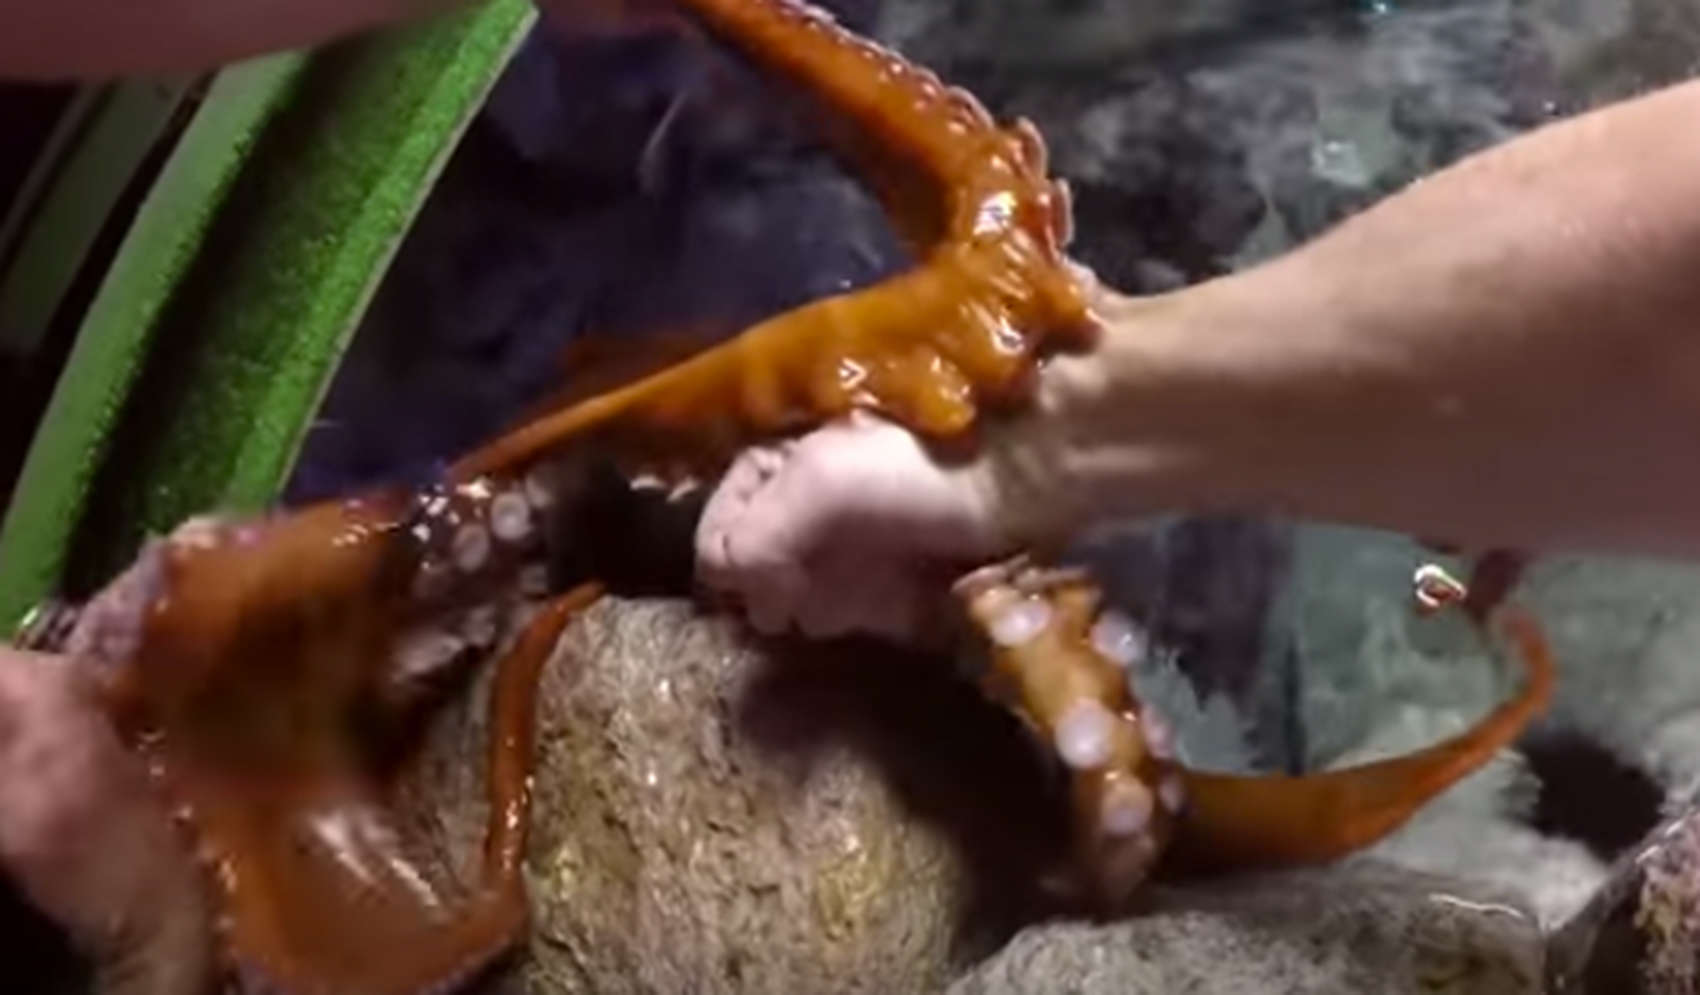 This giant Pacific octopus didn't want to let go after meeting a new visitor.